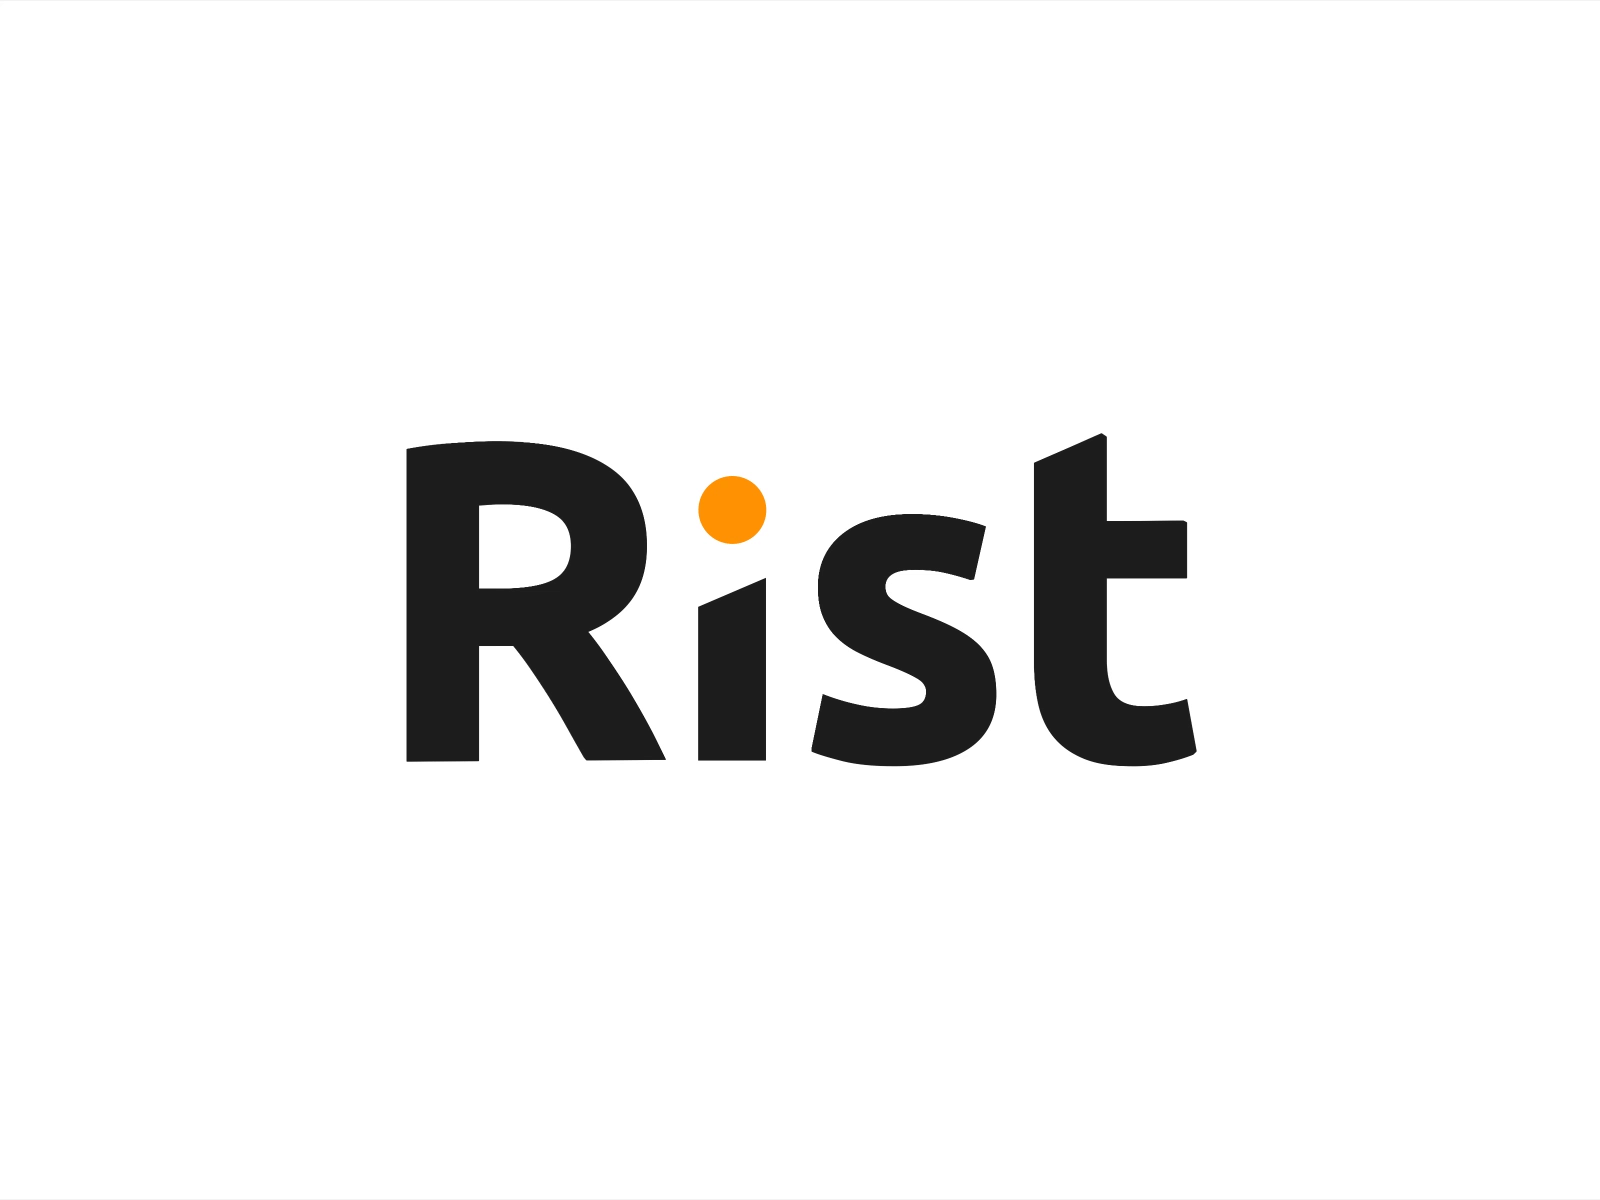 Logo reveal animation for "Rist"